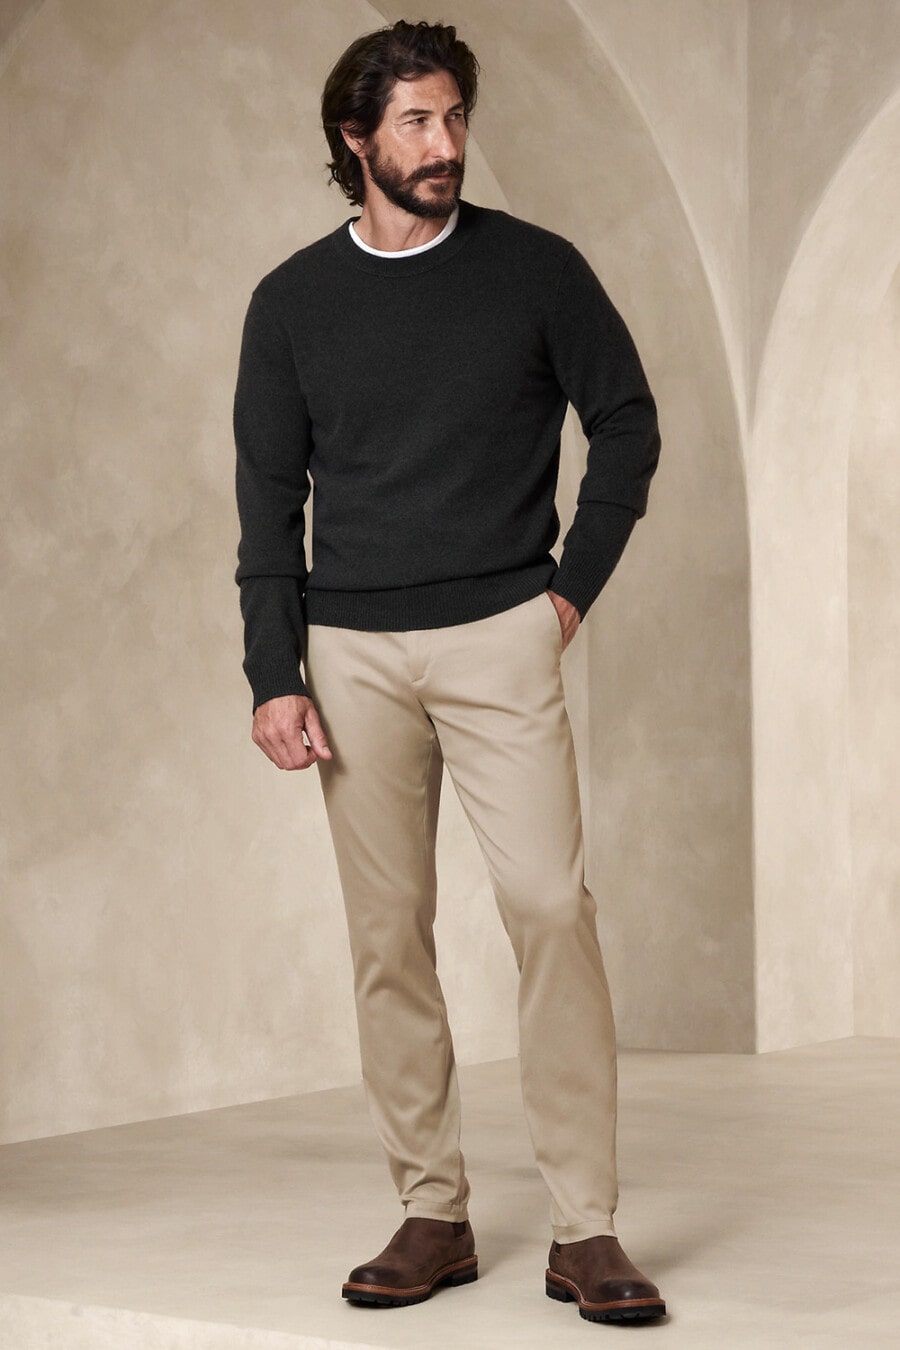 Men's khaki pants, white T-shirt, charcoal sweater and brown leather Chelsea boots outfit